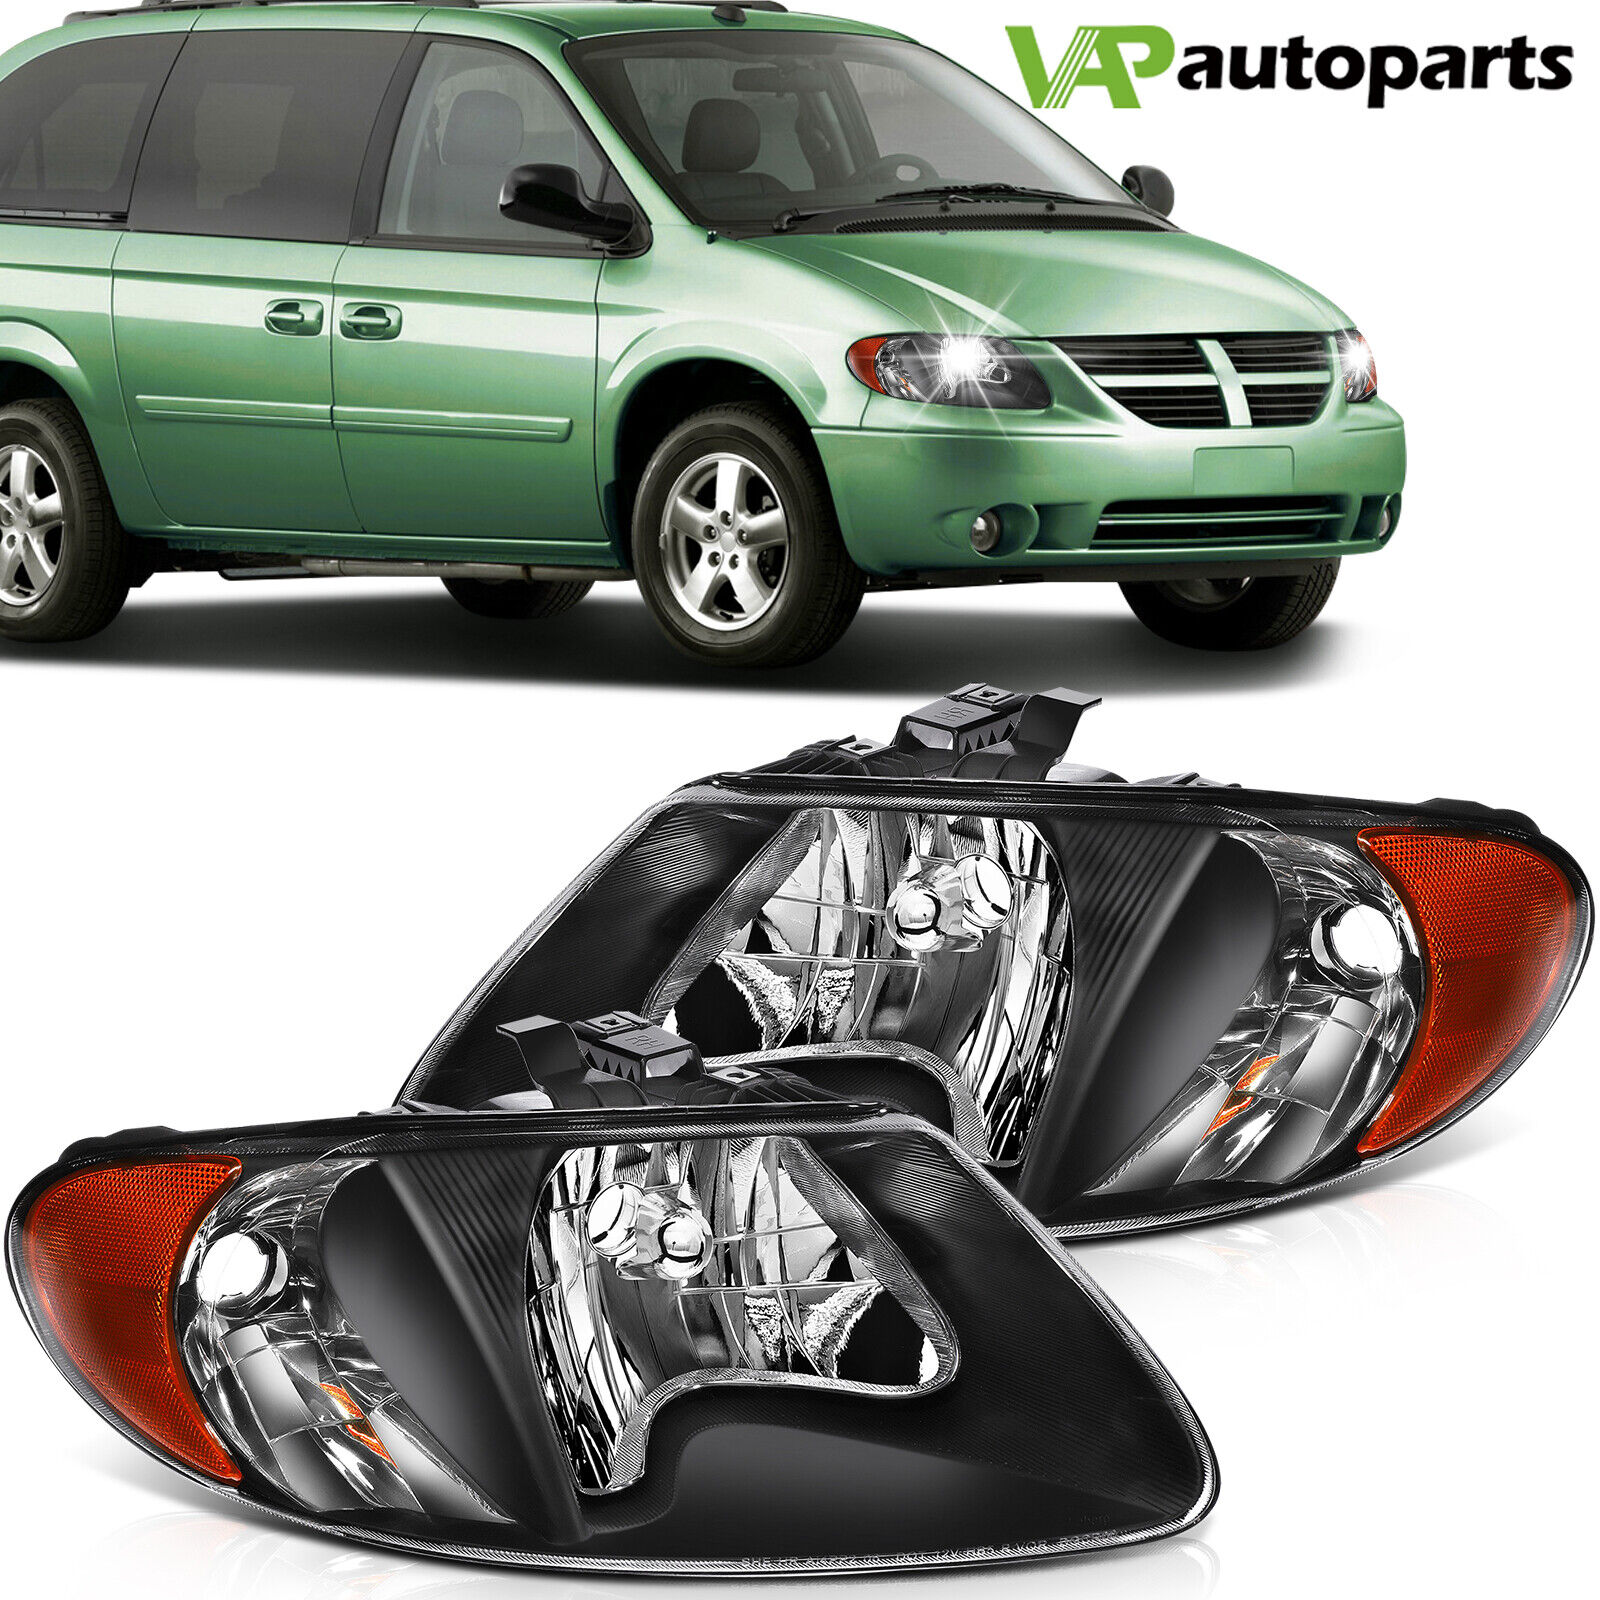 For 2001-2007 Dodge Caravan/Chrysler Town&Country Headlights Assembly Pair Lamp